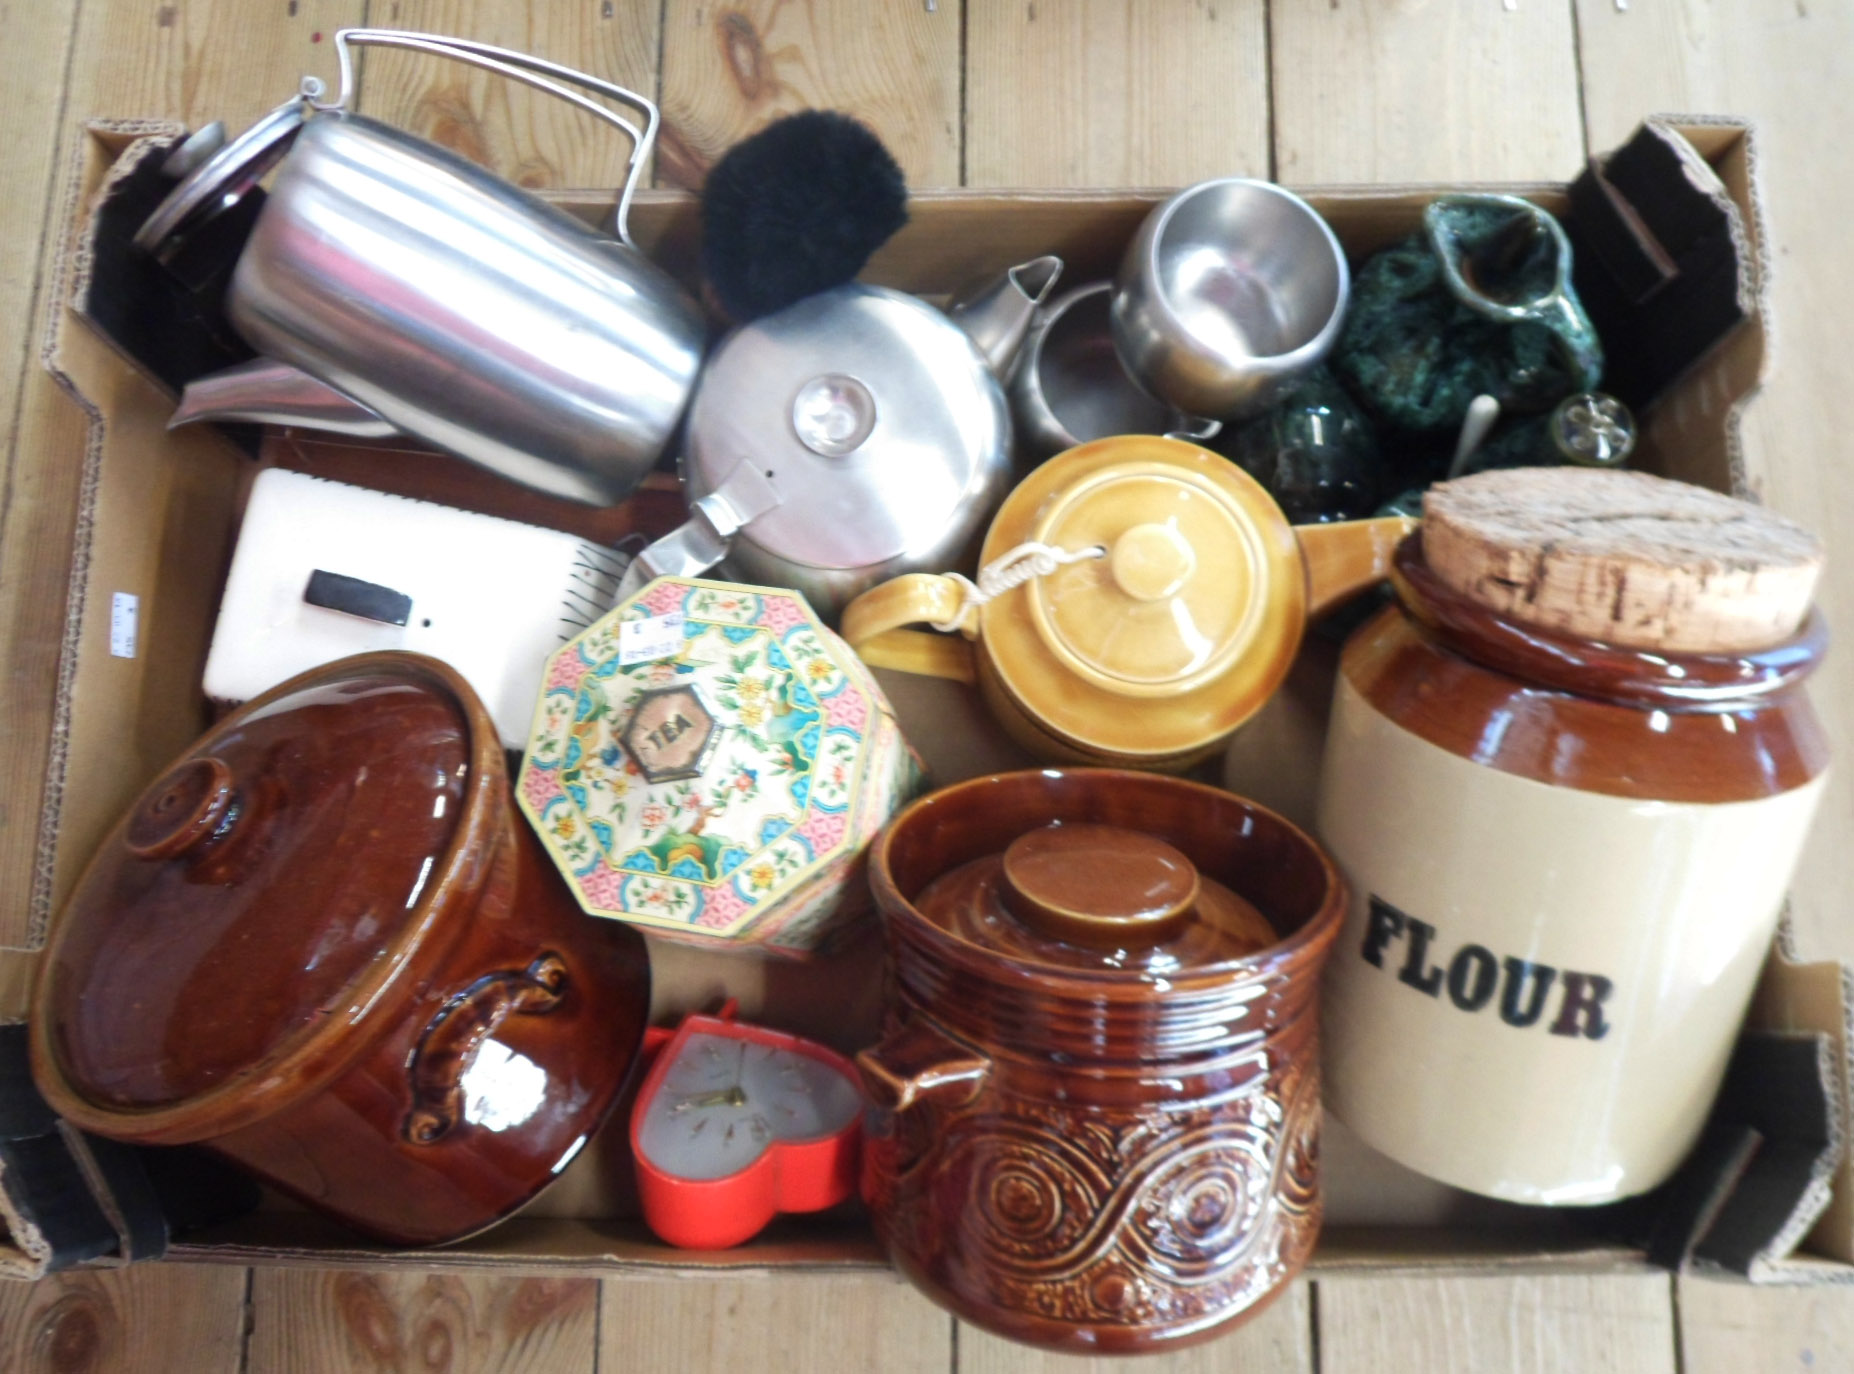 A box containing a quantity of kitchenalia including storage jars, cheese dish, teapot, etc.